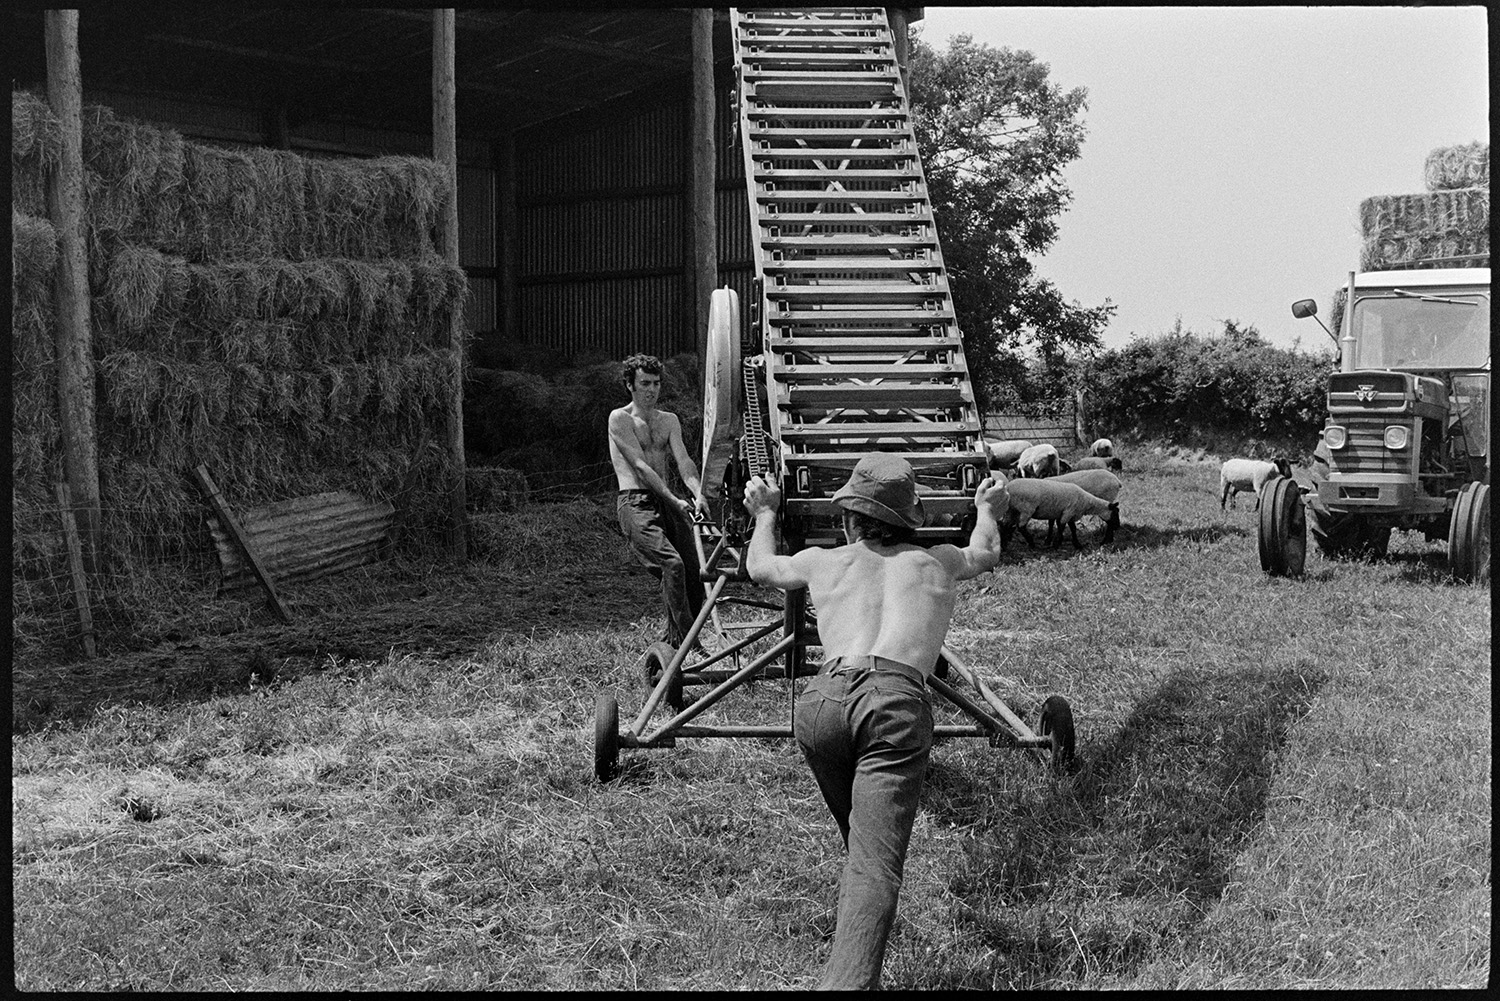 David Ward and Graham Ward moving an elevator by a barn with stacks of hay bales at Parsonage, Iddelseigh. Sheep and a tractor with a trailer full of hay bales can be seen in the background.